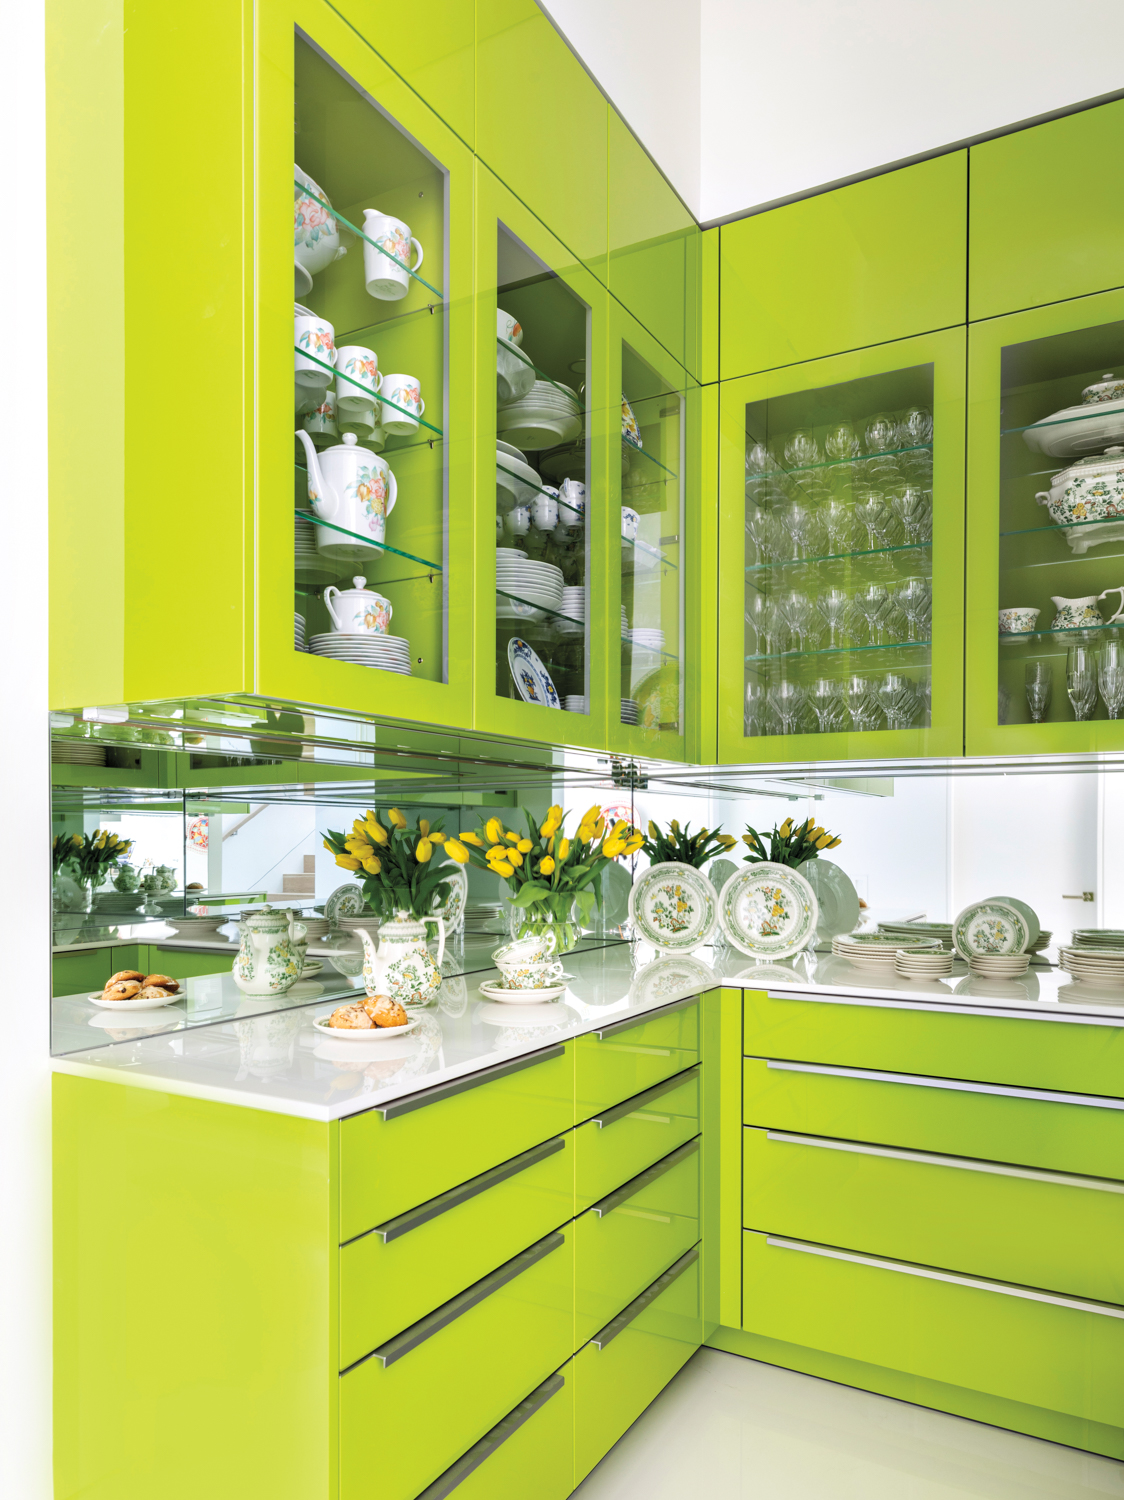 pantry featuring bright green cabinetry